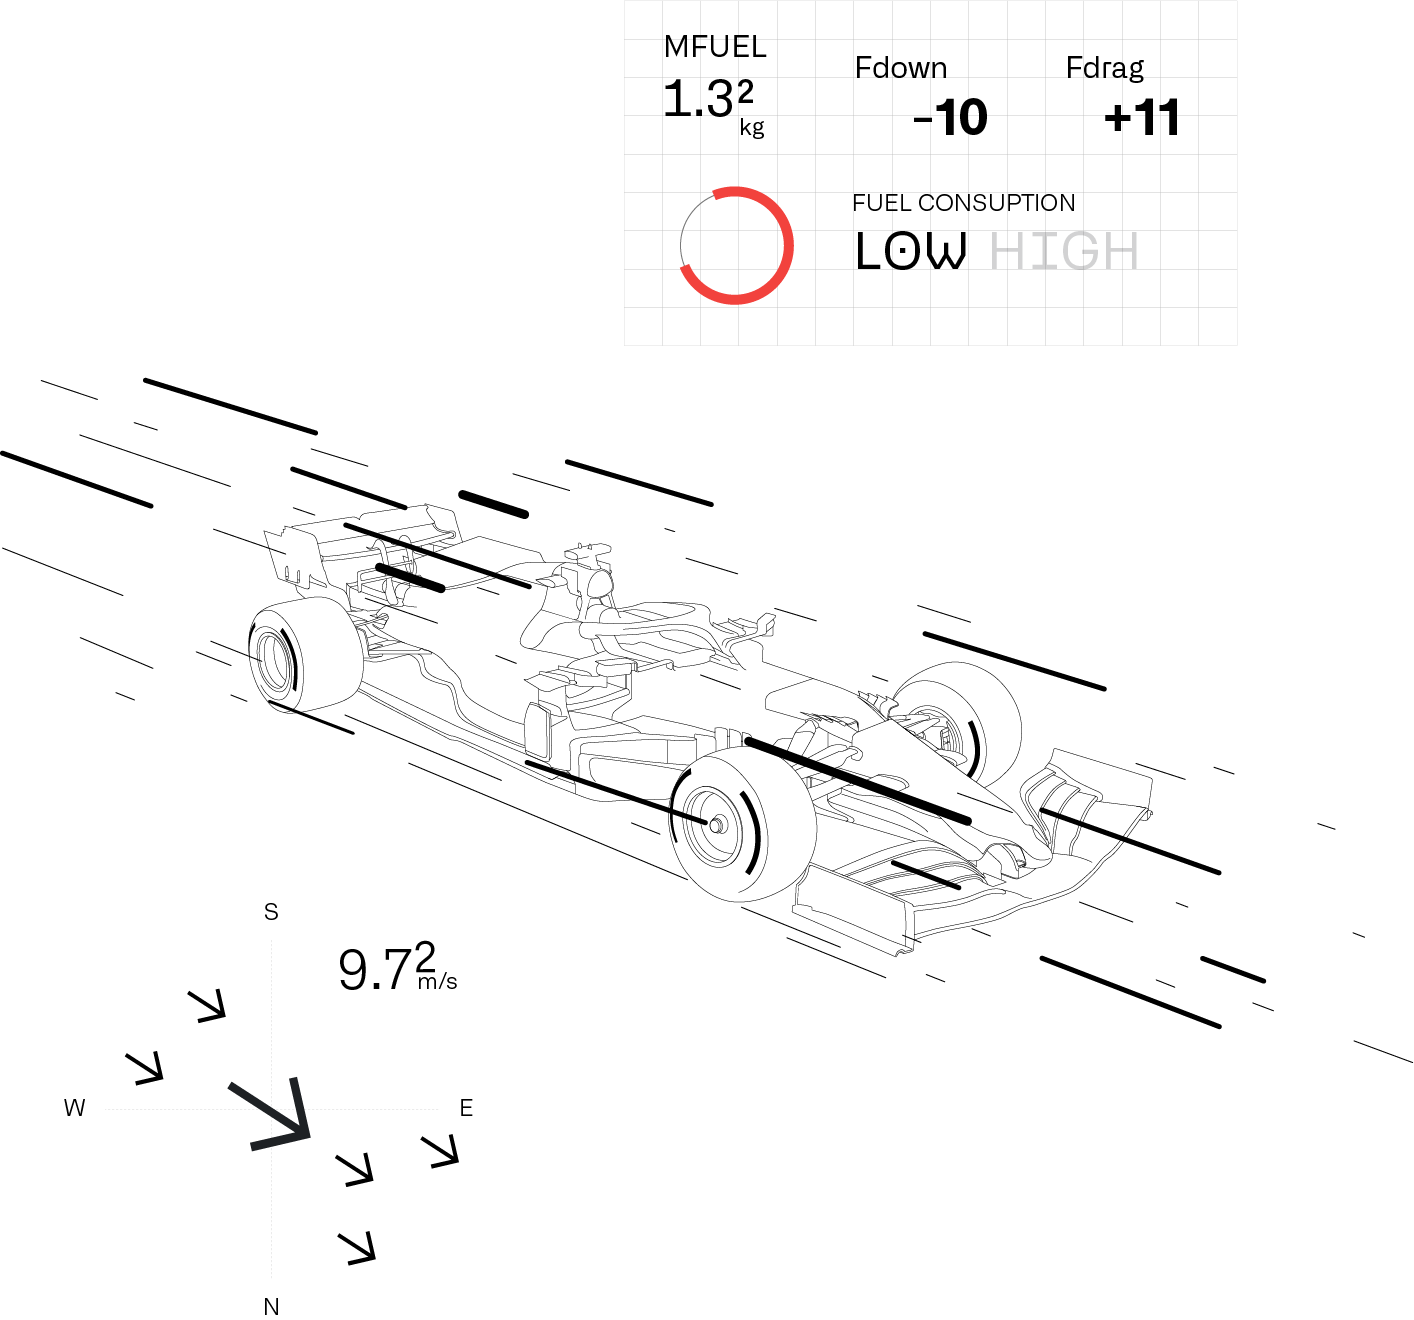 Illustration of Ferrari F1 car in motion with fuel consumption chart